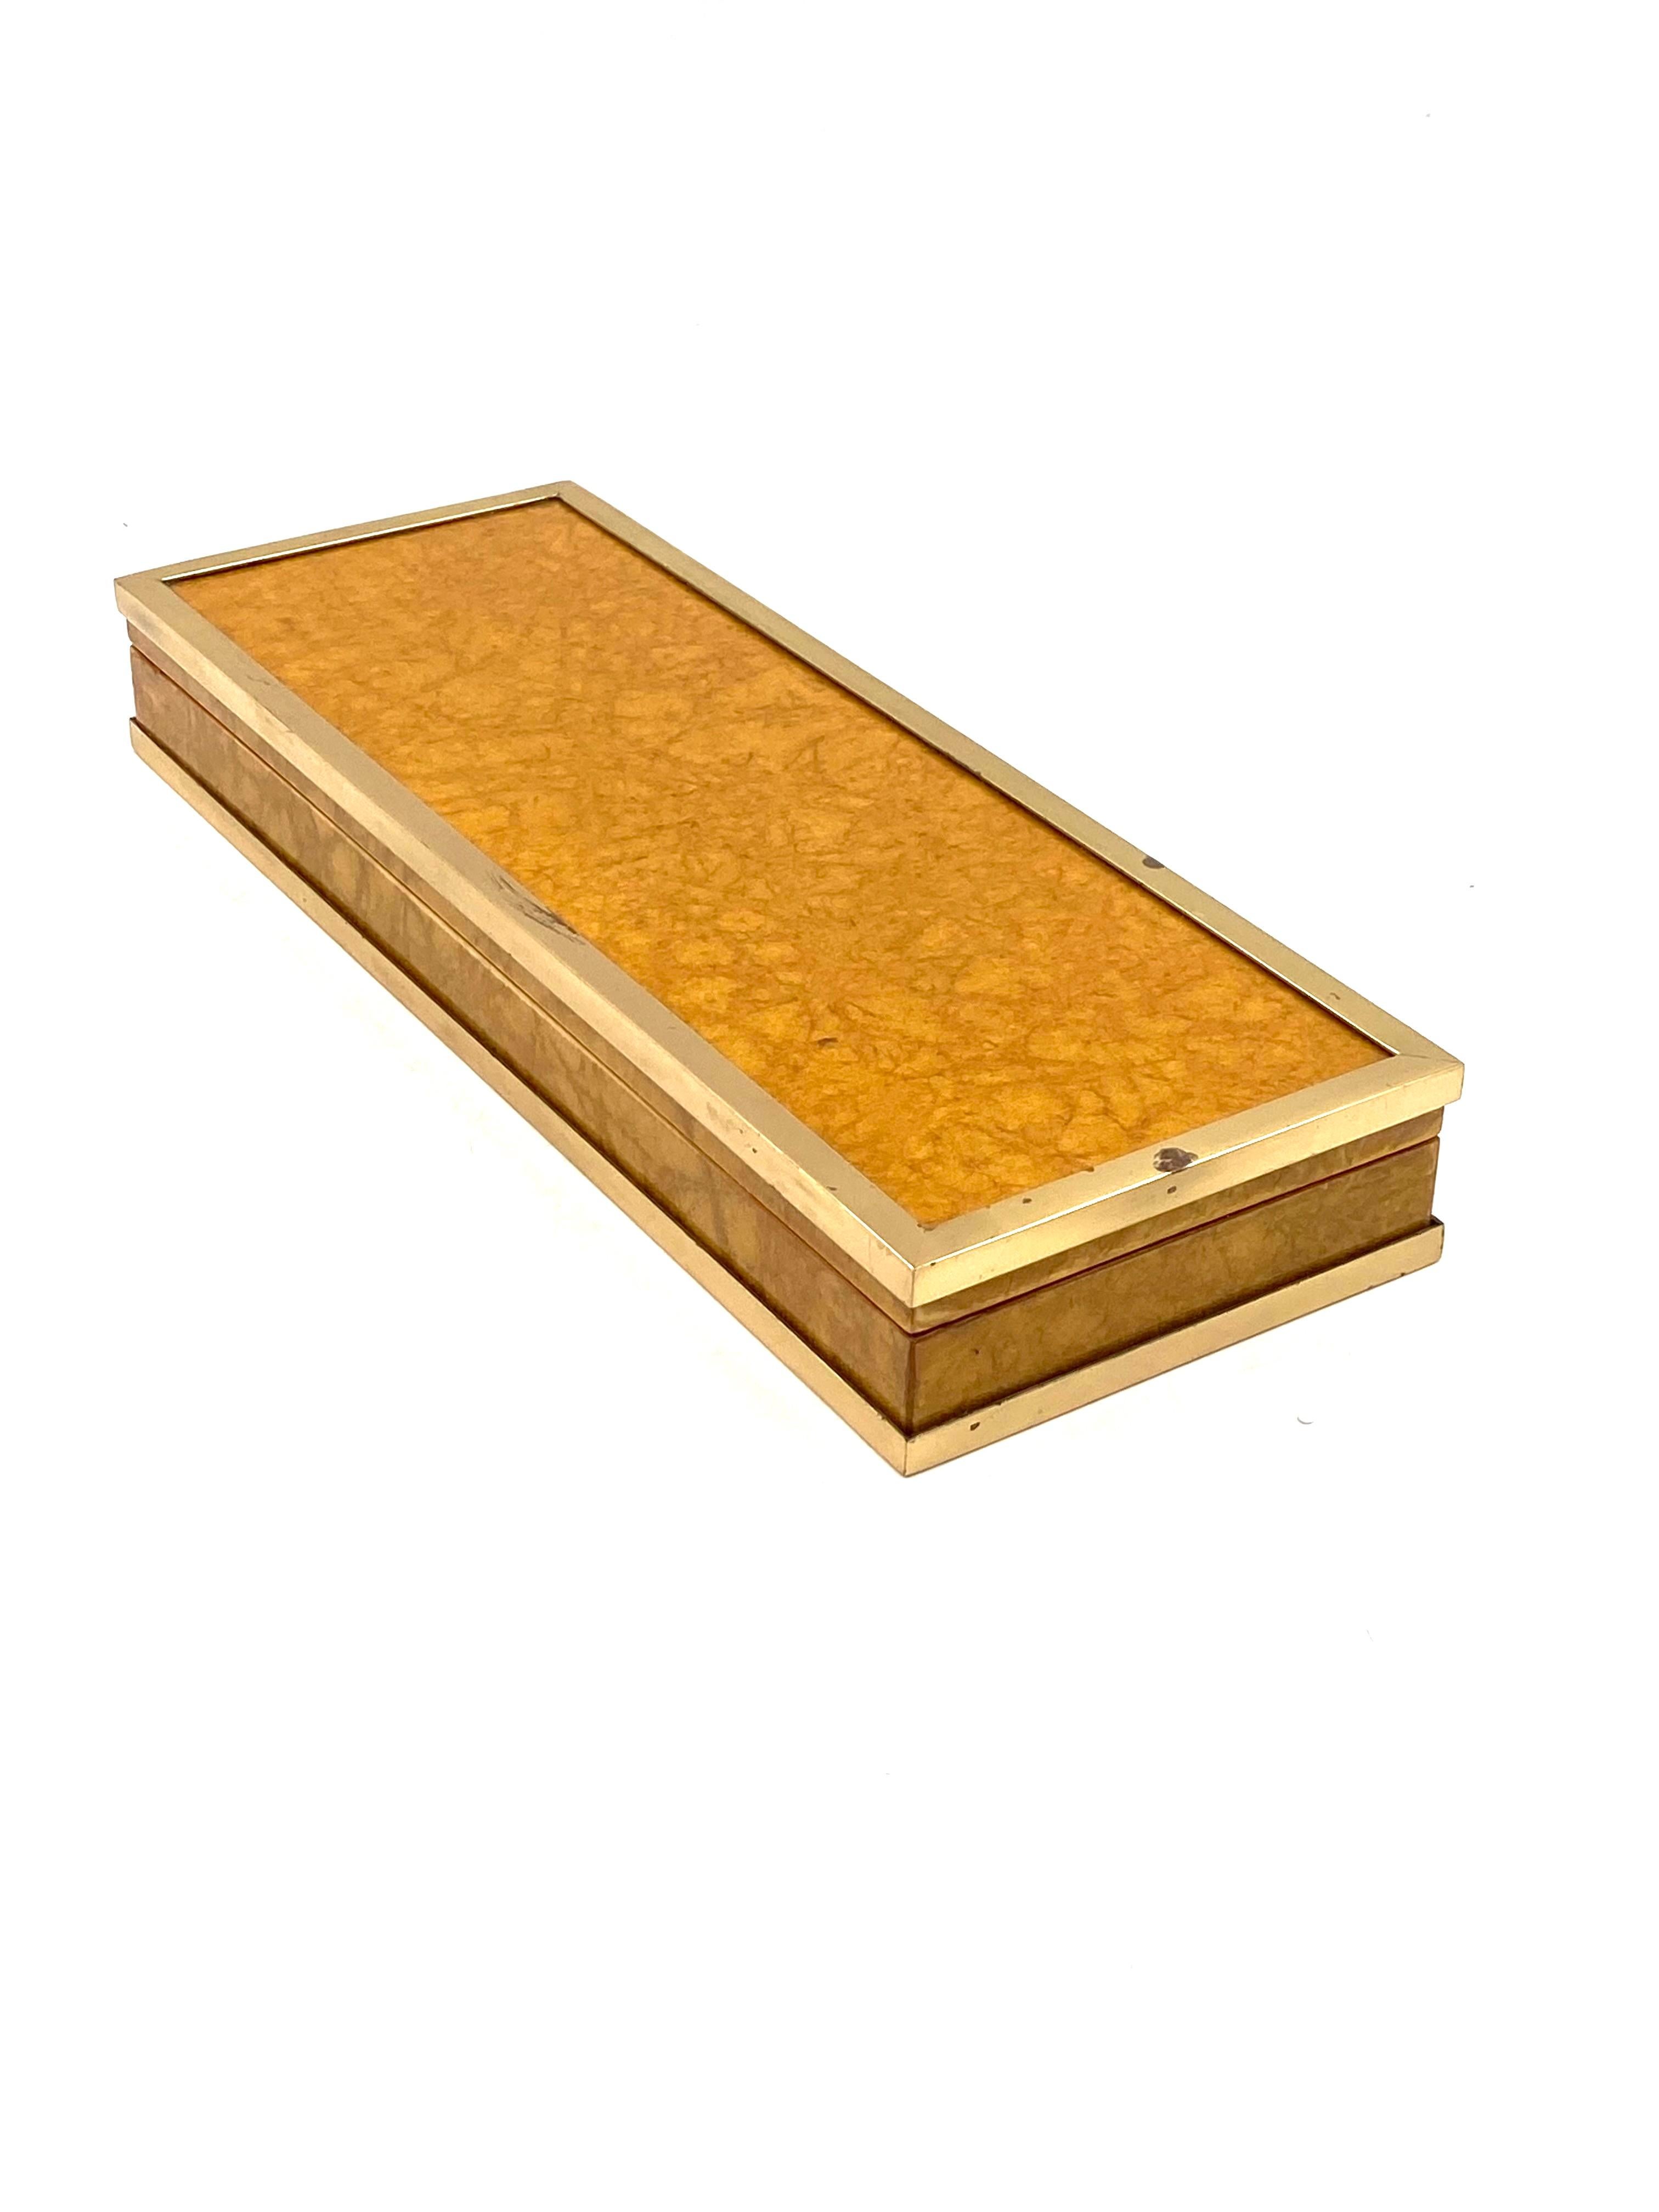 Tommaso Barbi, Wood and Brass Cigars Box, Italy, 1970 For Sale 11